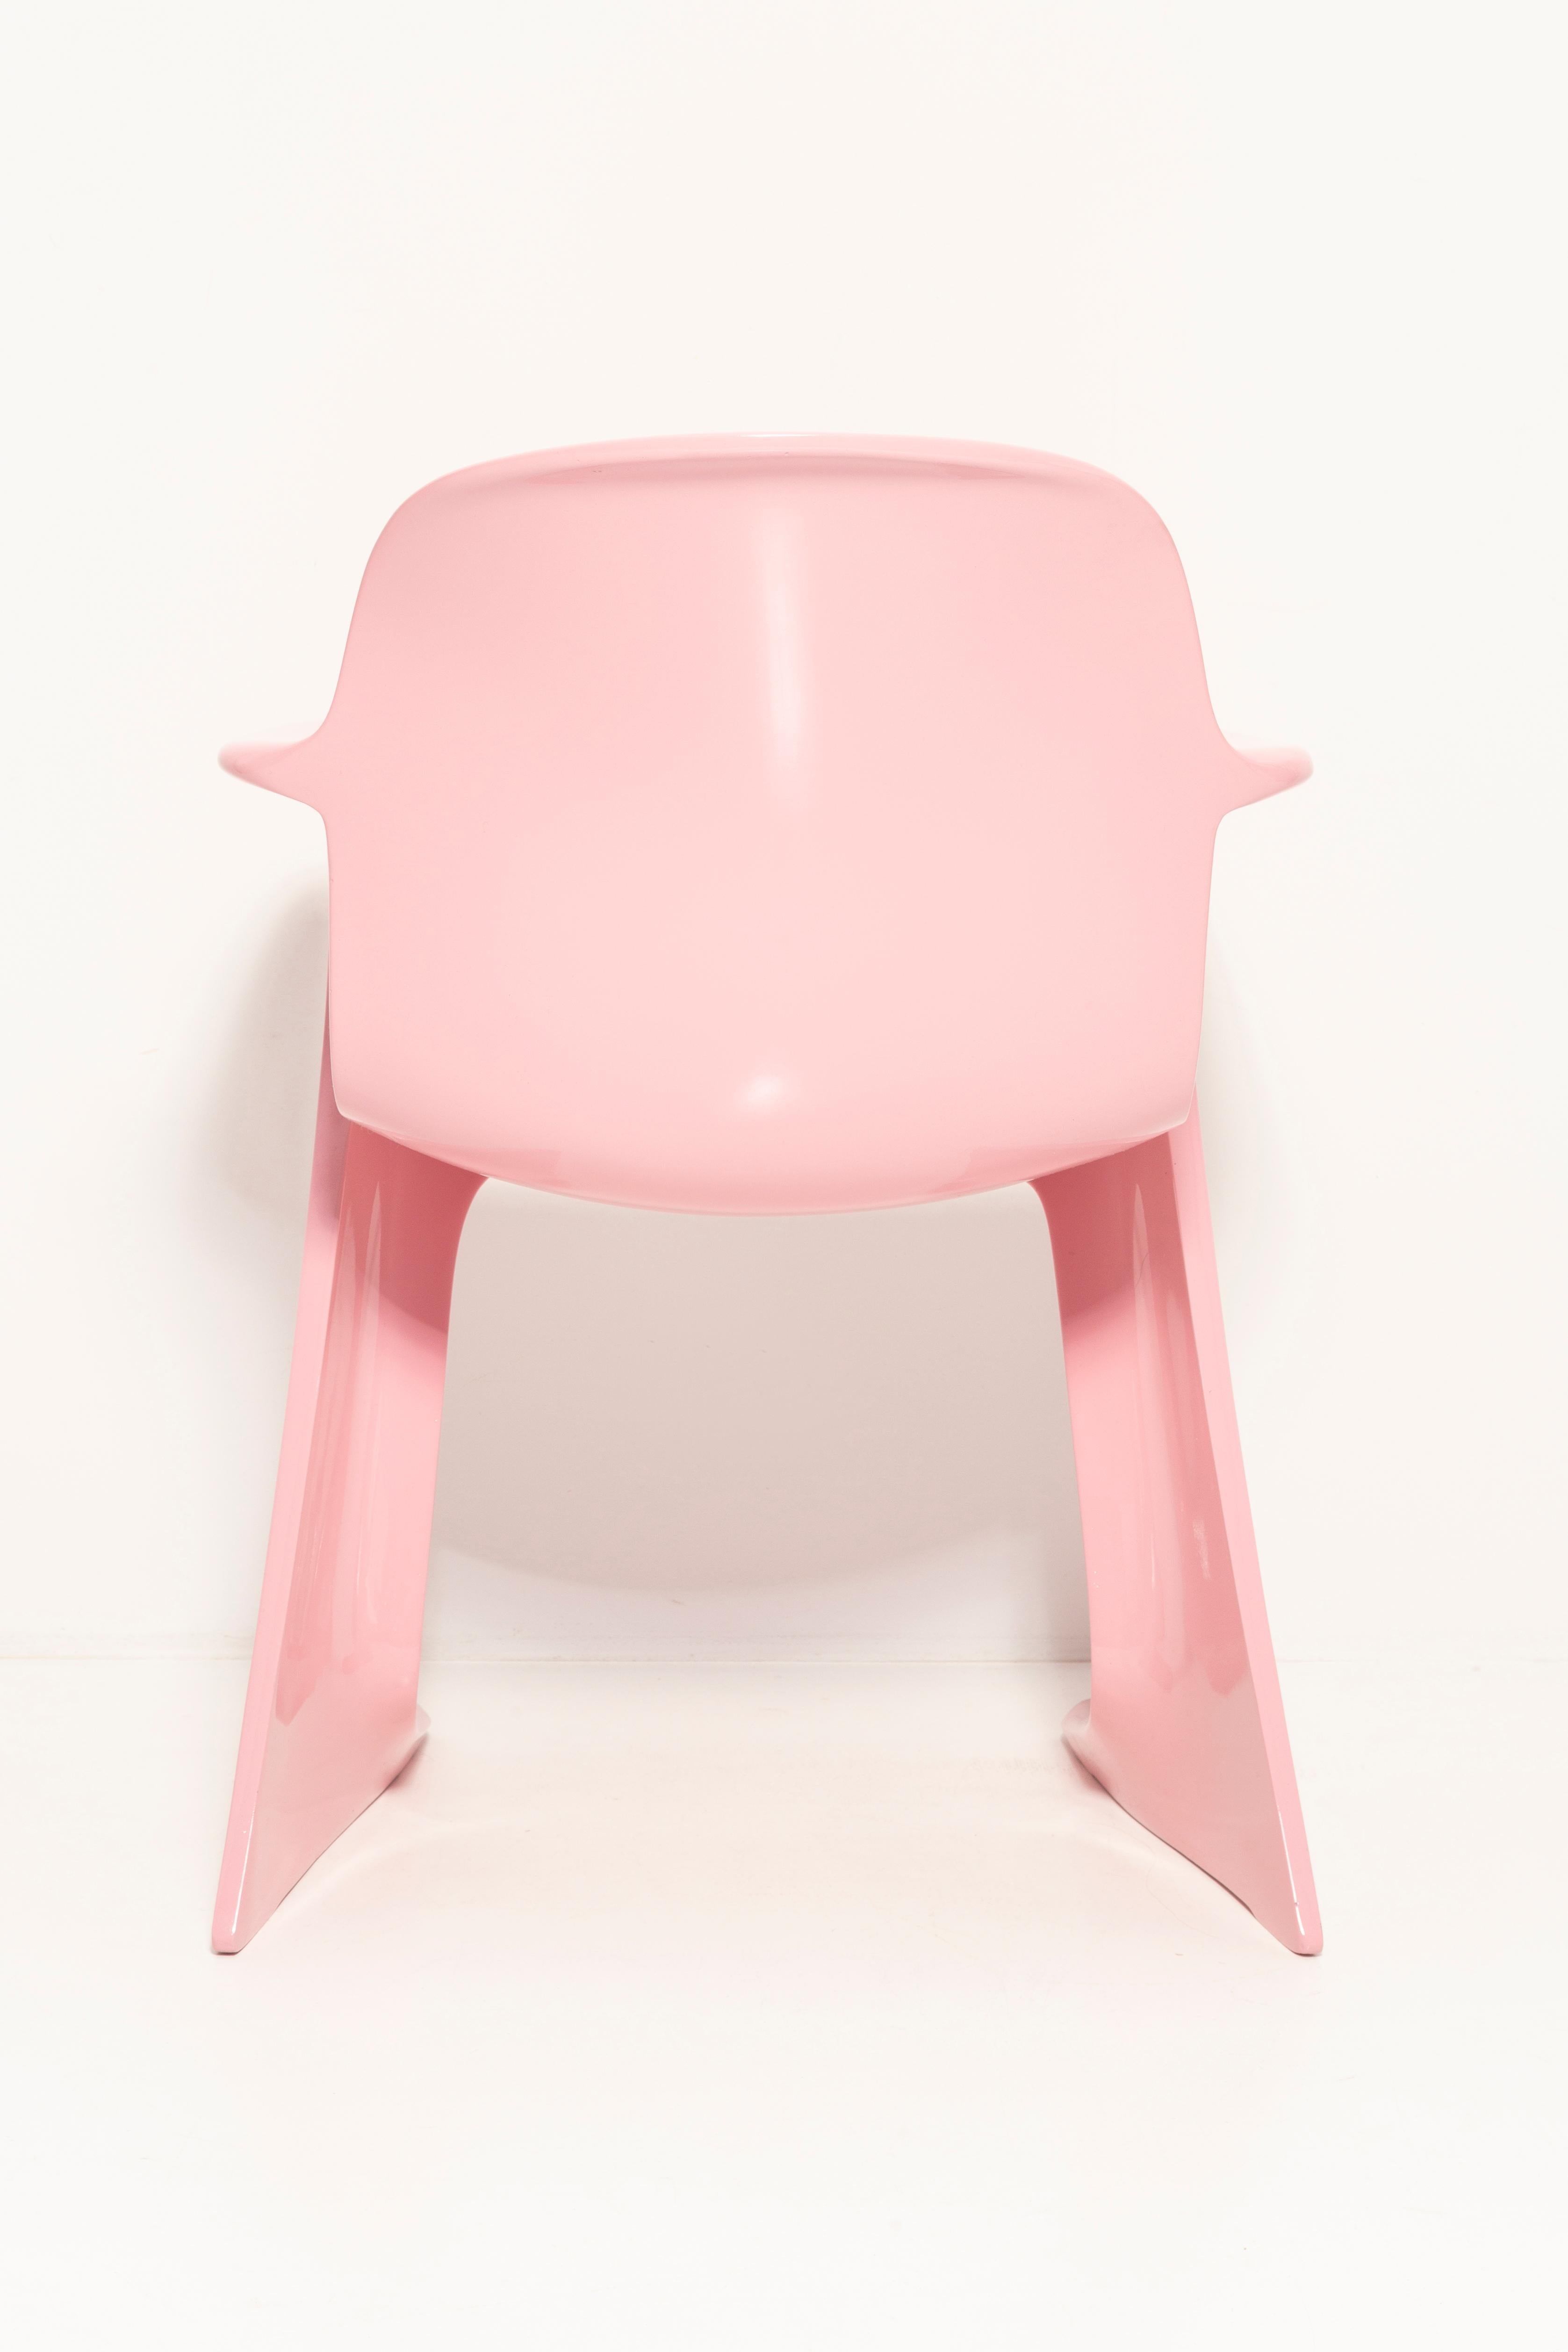 Mid-Century Light Pink Kangaroo Chair Designed by Ernst Moeckl, Germany, 1968 For Sale 7